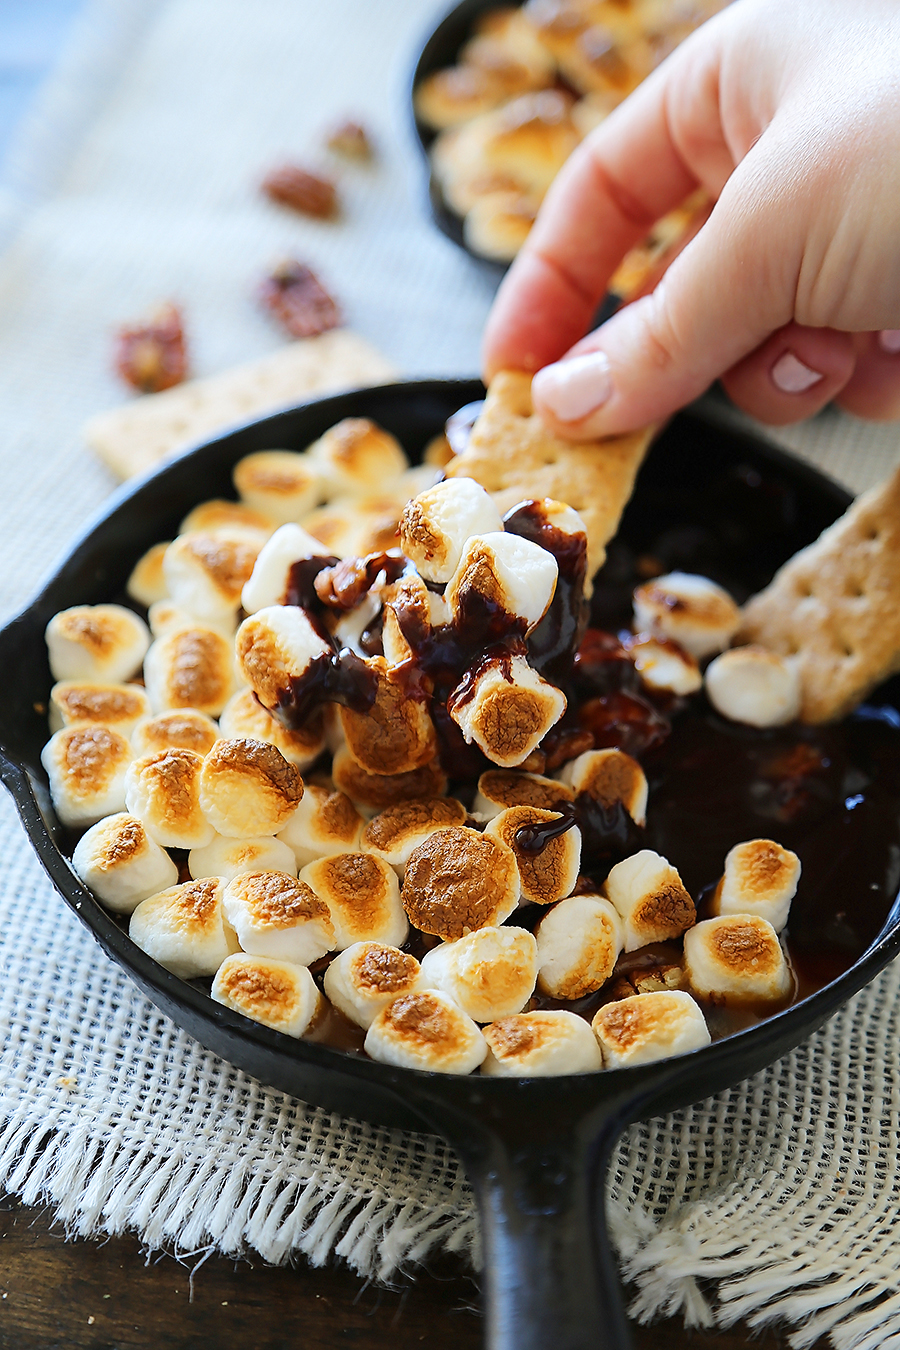 5-Ingredient Caramel Pecan S'mores Dip - Perfect for parties! Loaded with creamy caramel and pecans, this treat is super quick and easy! thecomfortofcooking.com